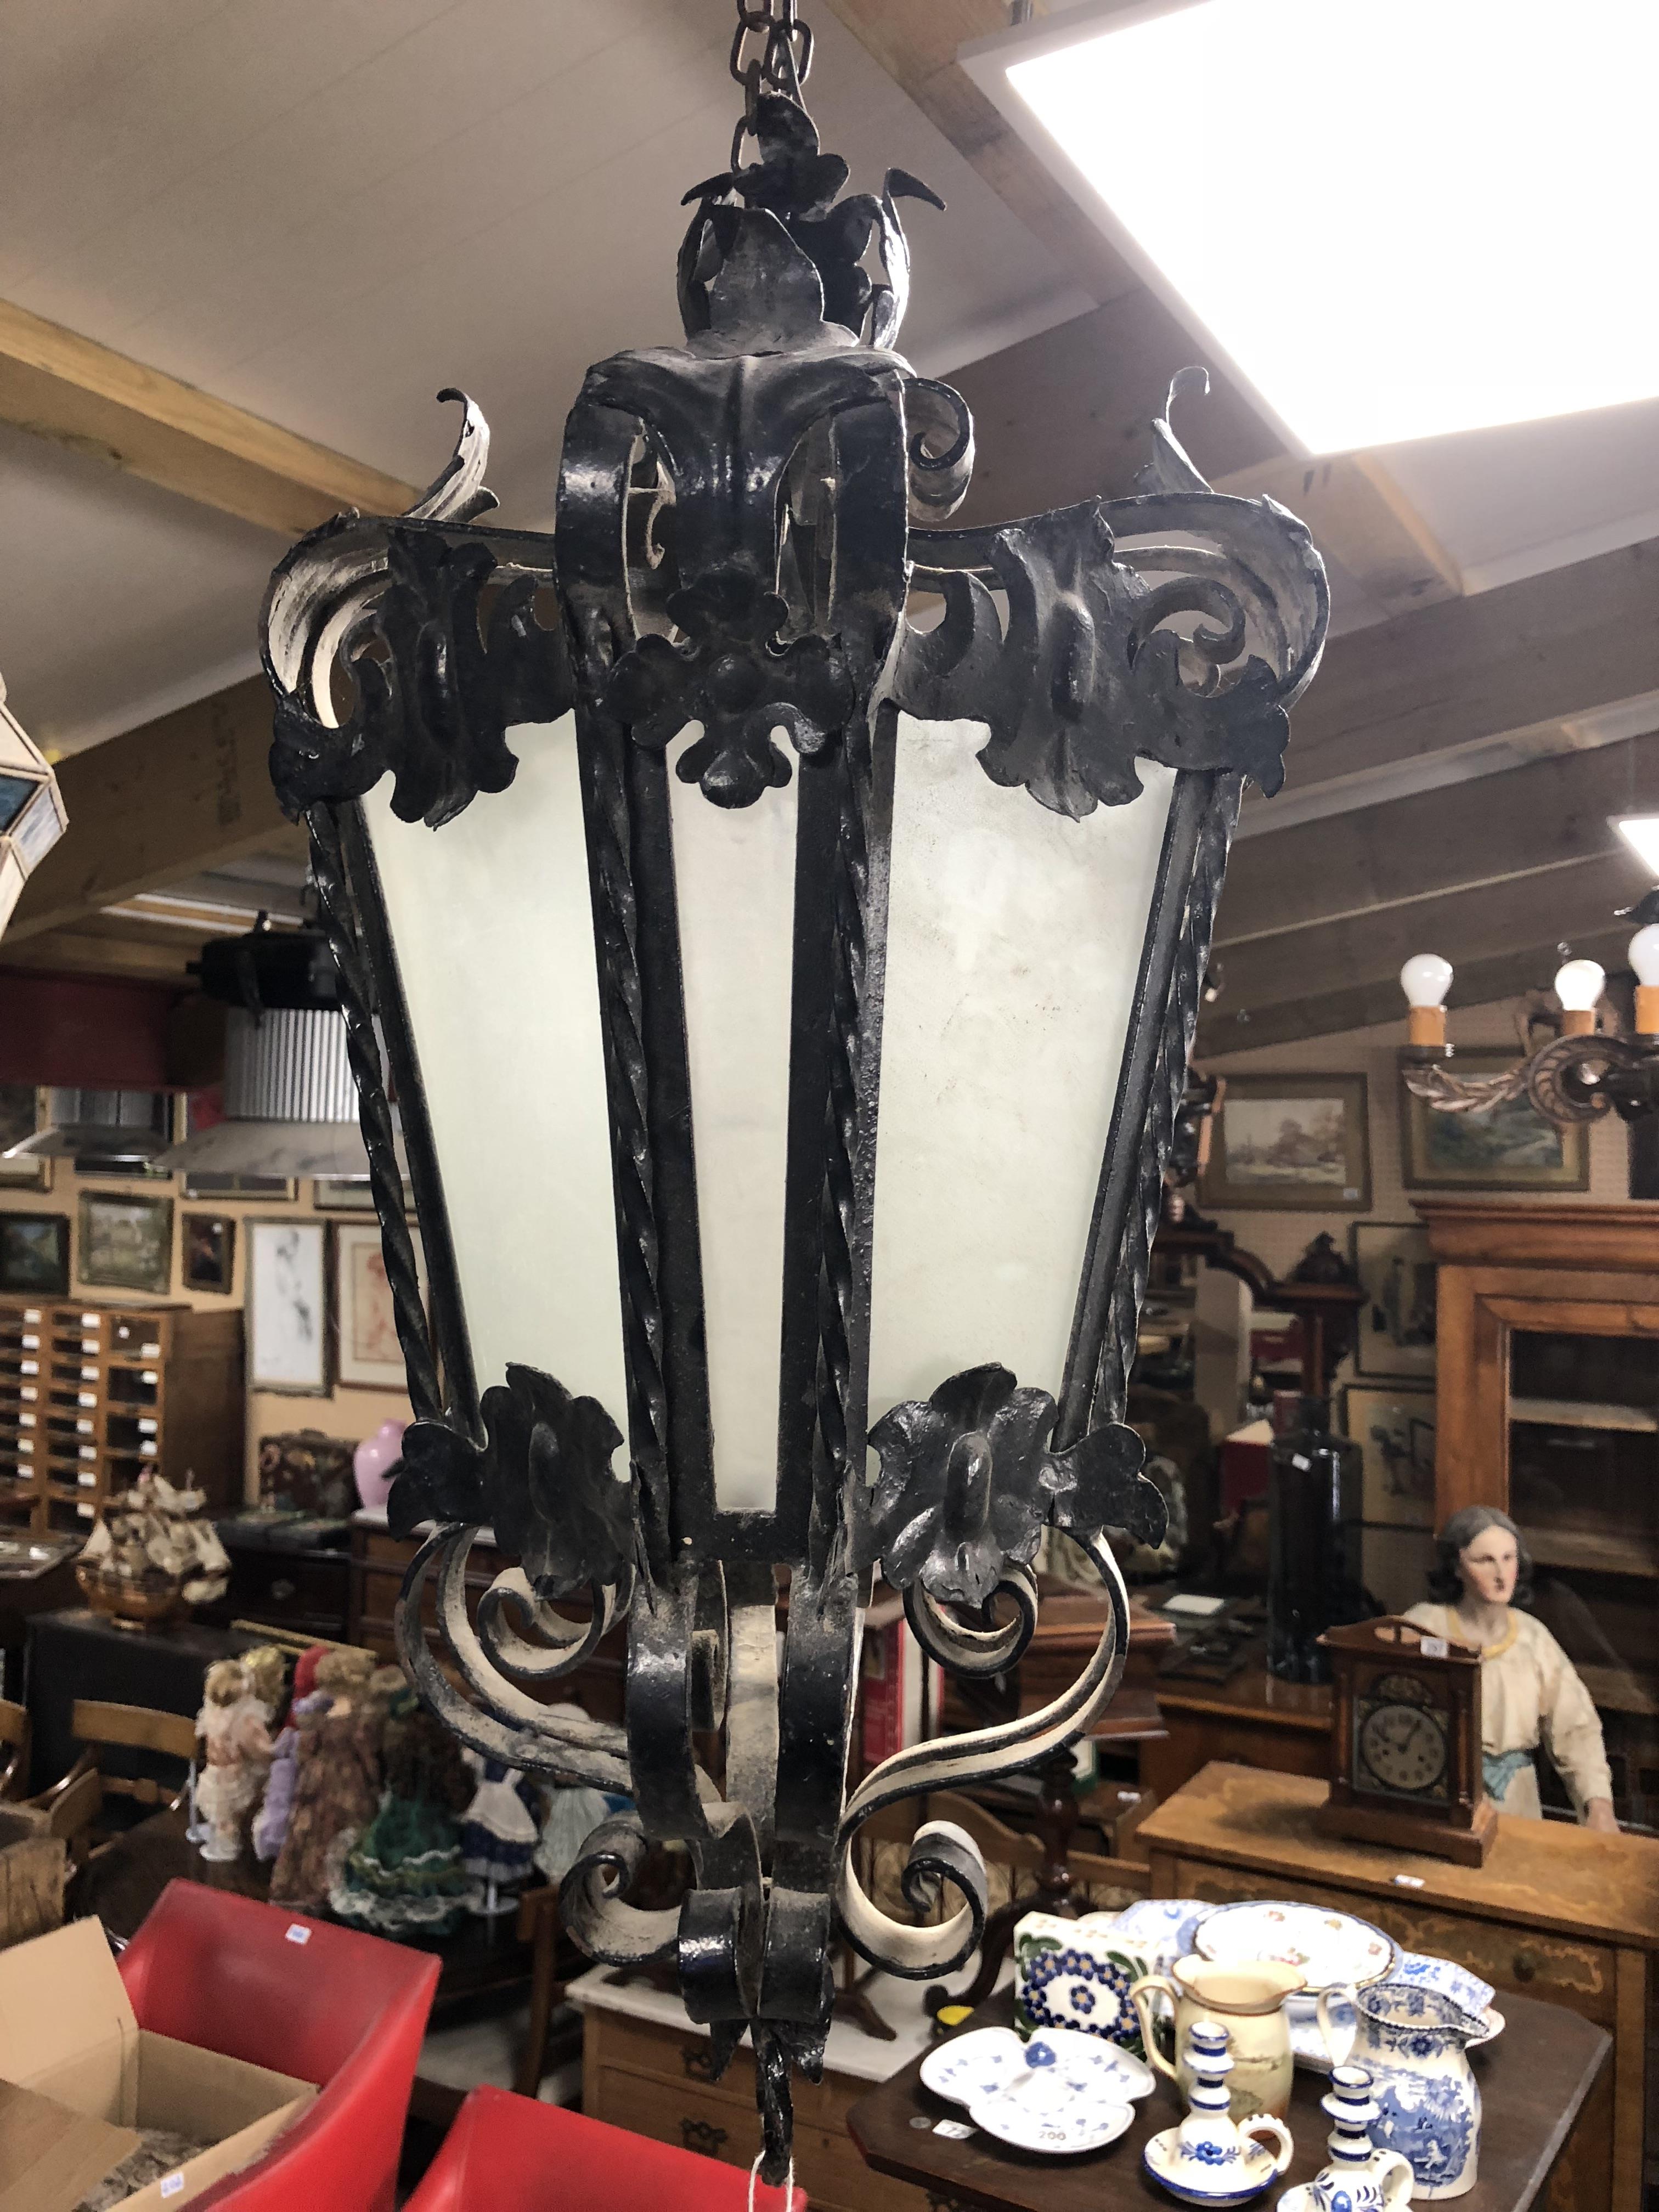 ANTIQUE ROCCOCO STYLE LANTERN WROUGHT IRON WITH OPAQUE GLASS PANELS GOOD CONDITION, 1 PANE MISSING H